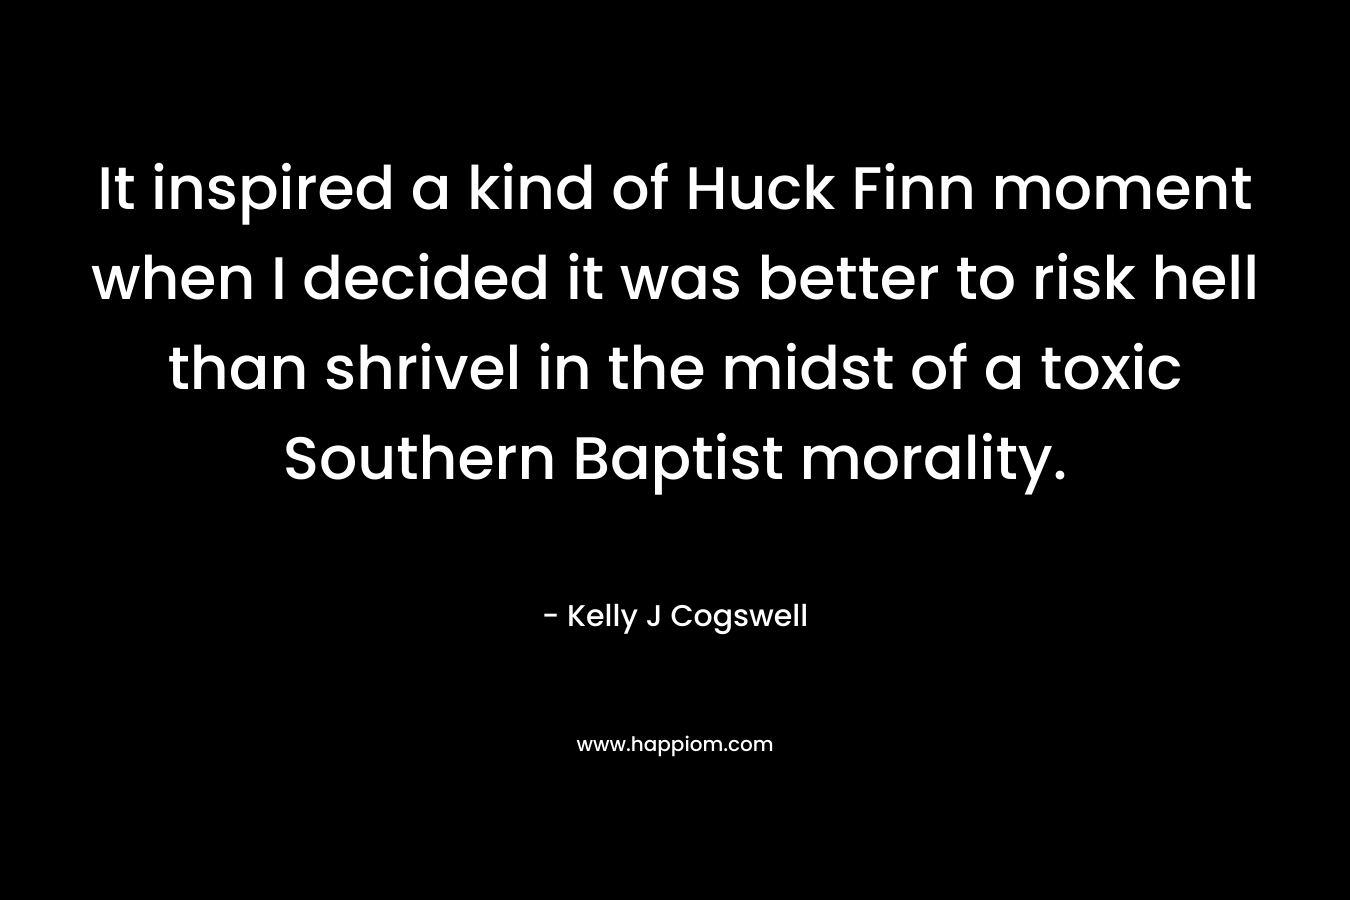 It inspired a kind of Huck Finn moment when I decided it was better to risk hell than shrivel in the midst of a toxic Southern Baptist morality. – Kelly J Cogswell